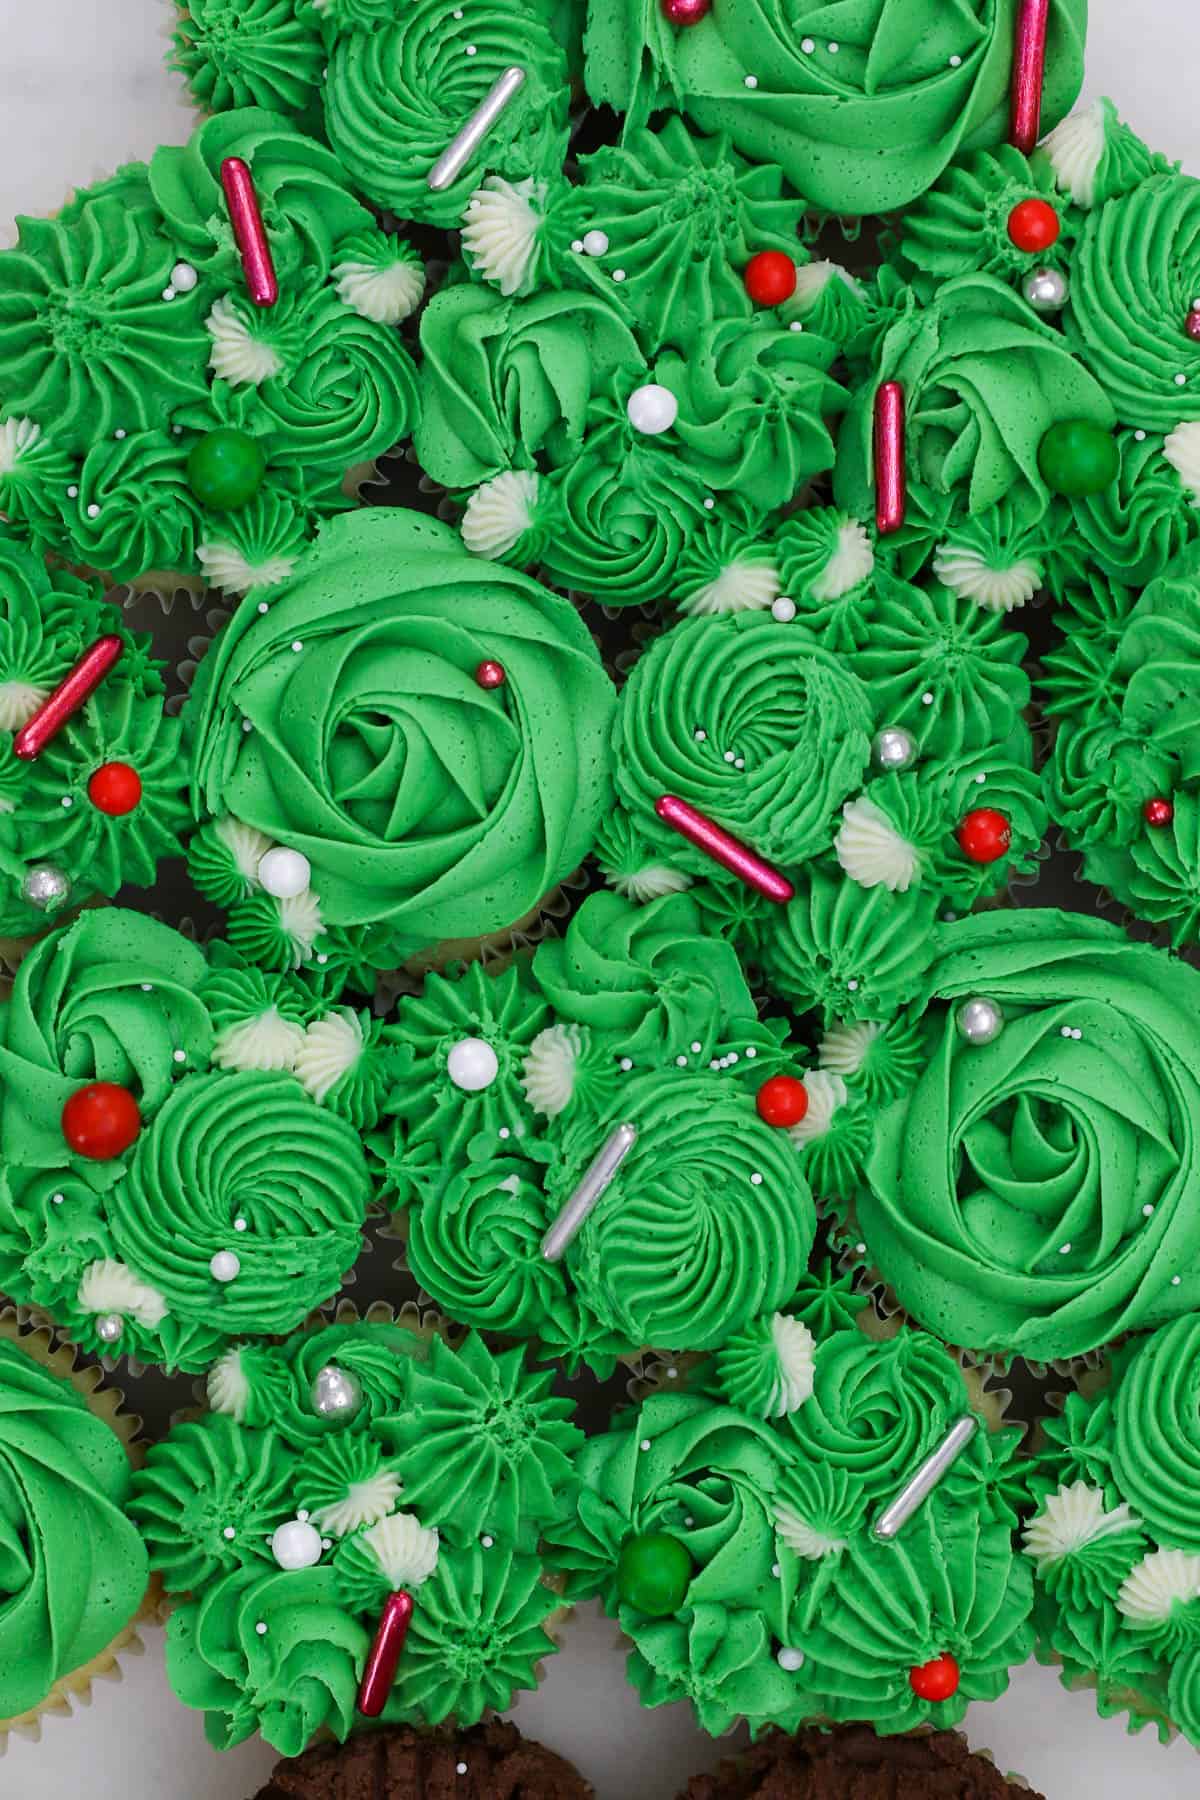 A close-up image of the green section of a homemade Christmas tree cupcake cake